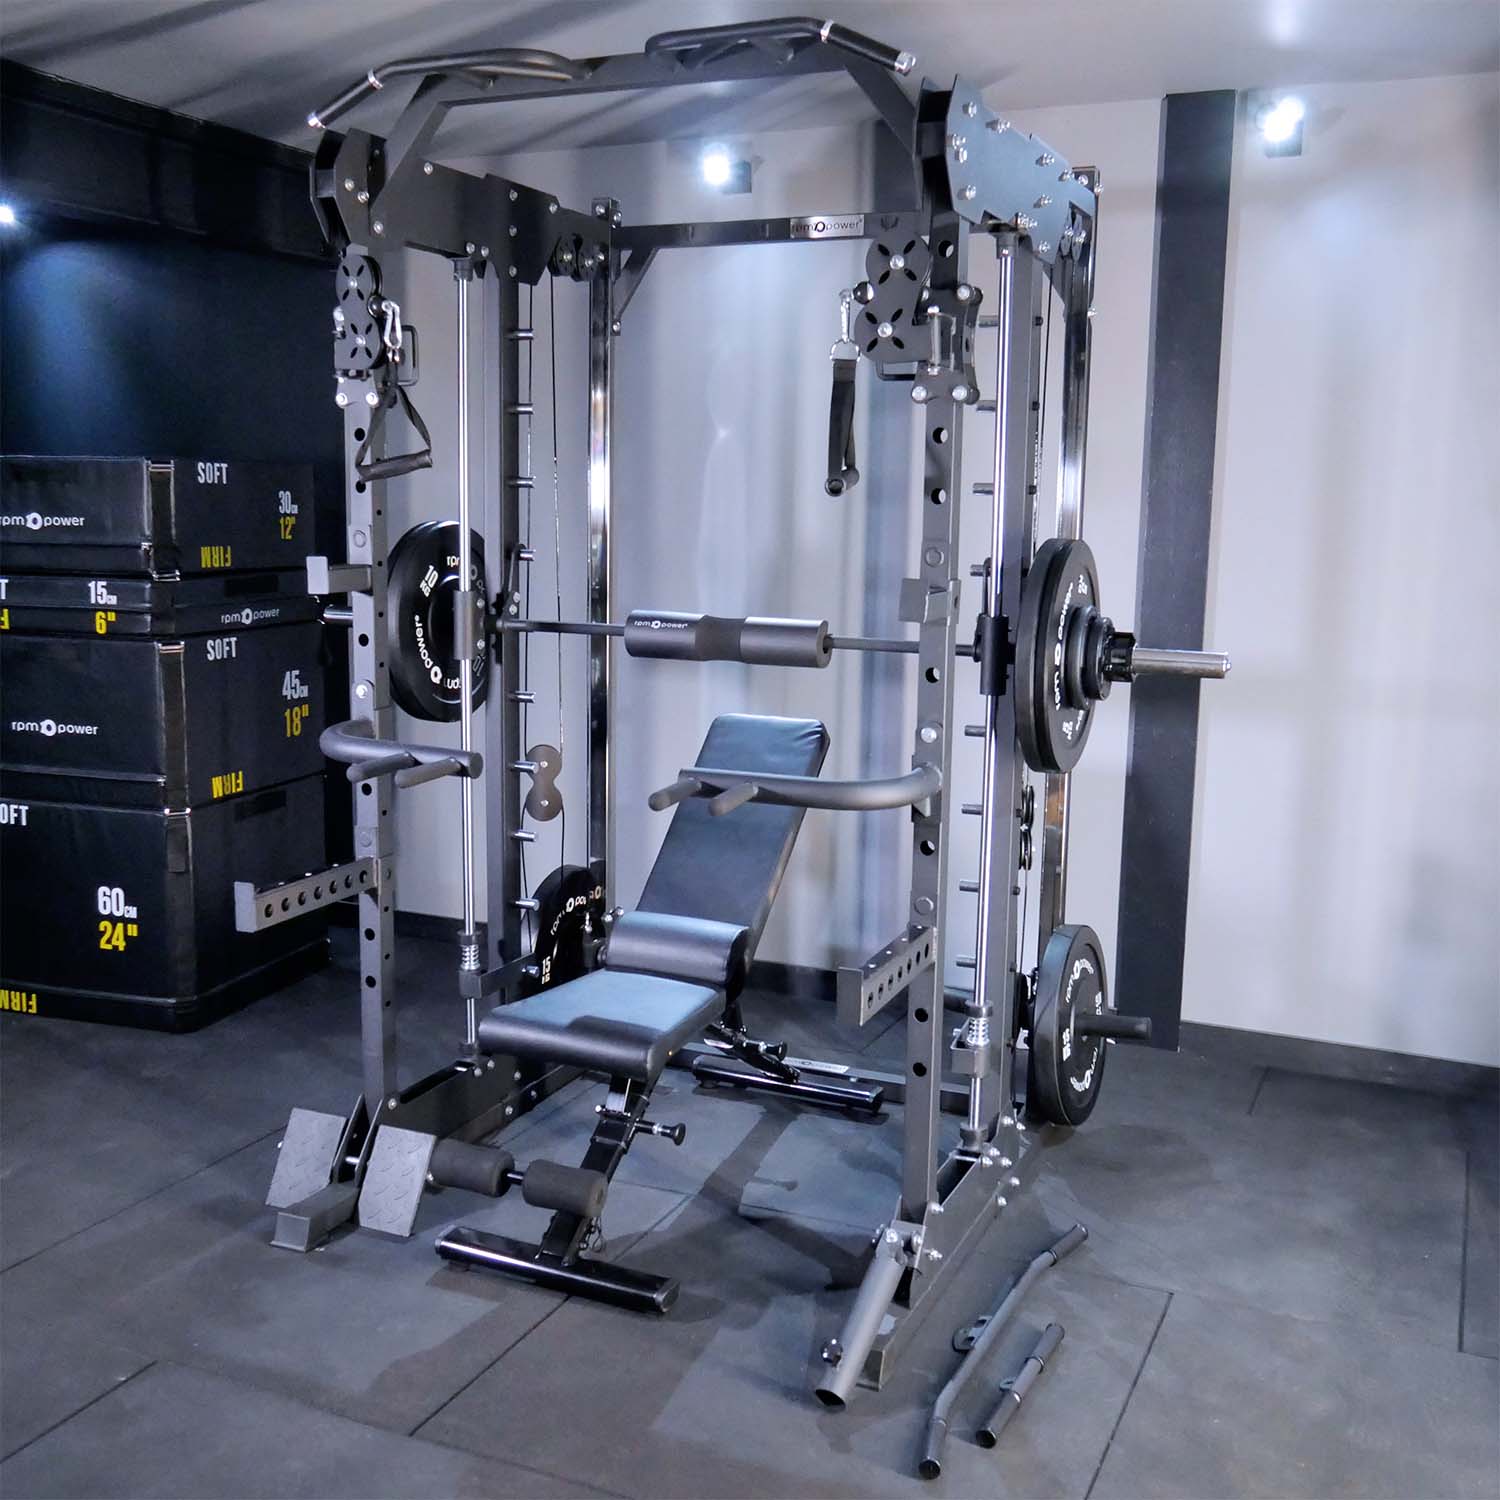 Weight Set Package Deals  Home & Commercial Gym Equipment